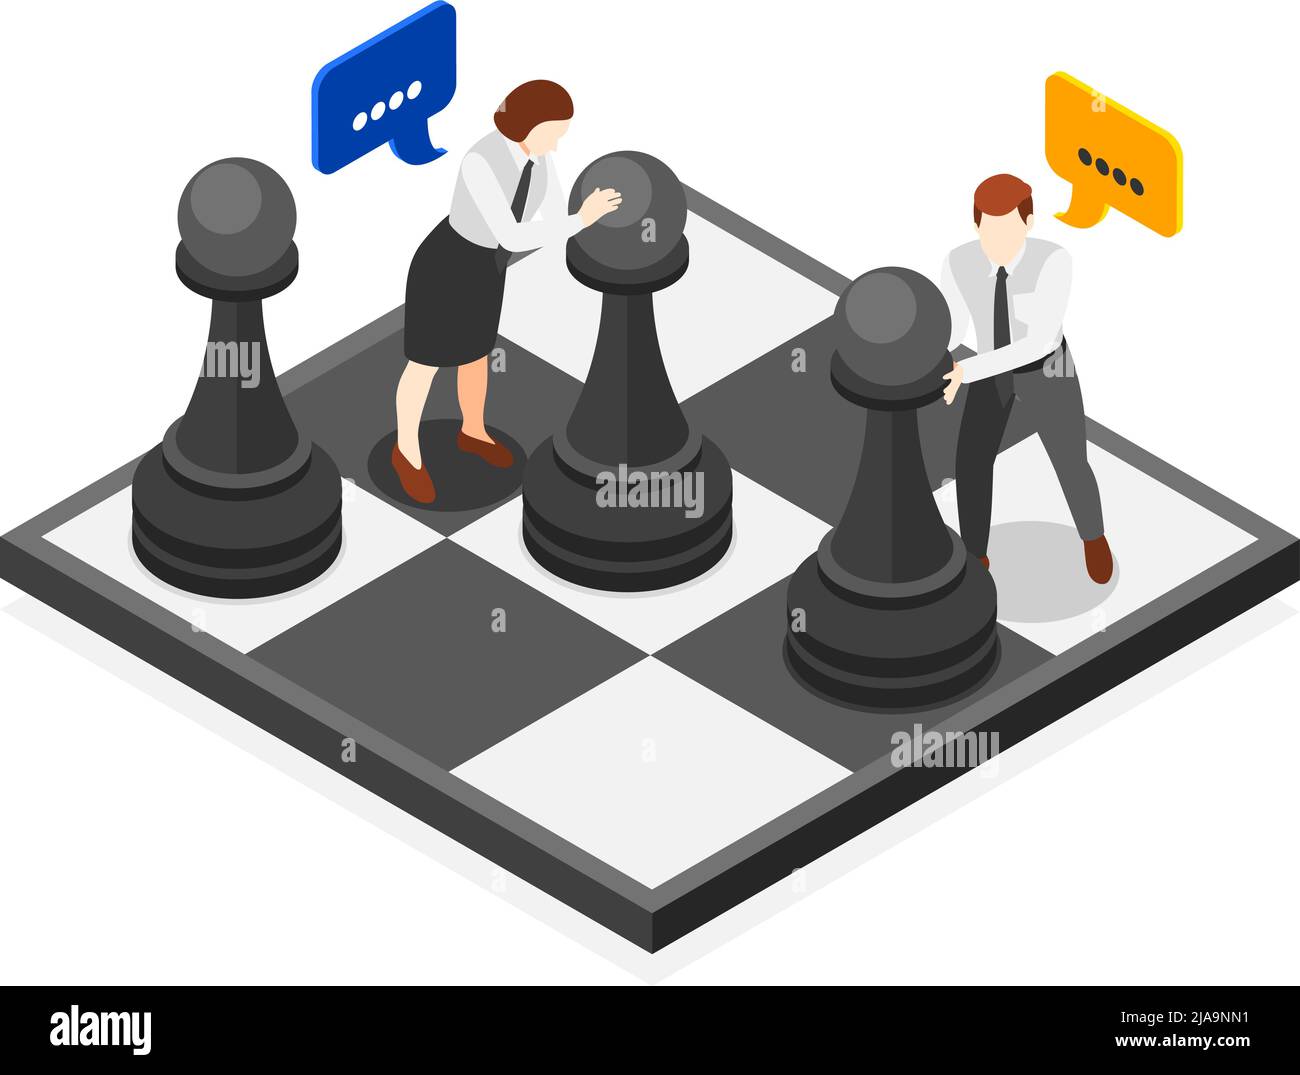 5,359 Two People Chess Game Images, Stock Photos, 3D objects, & Vectors